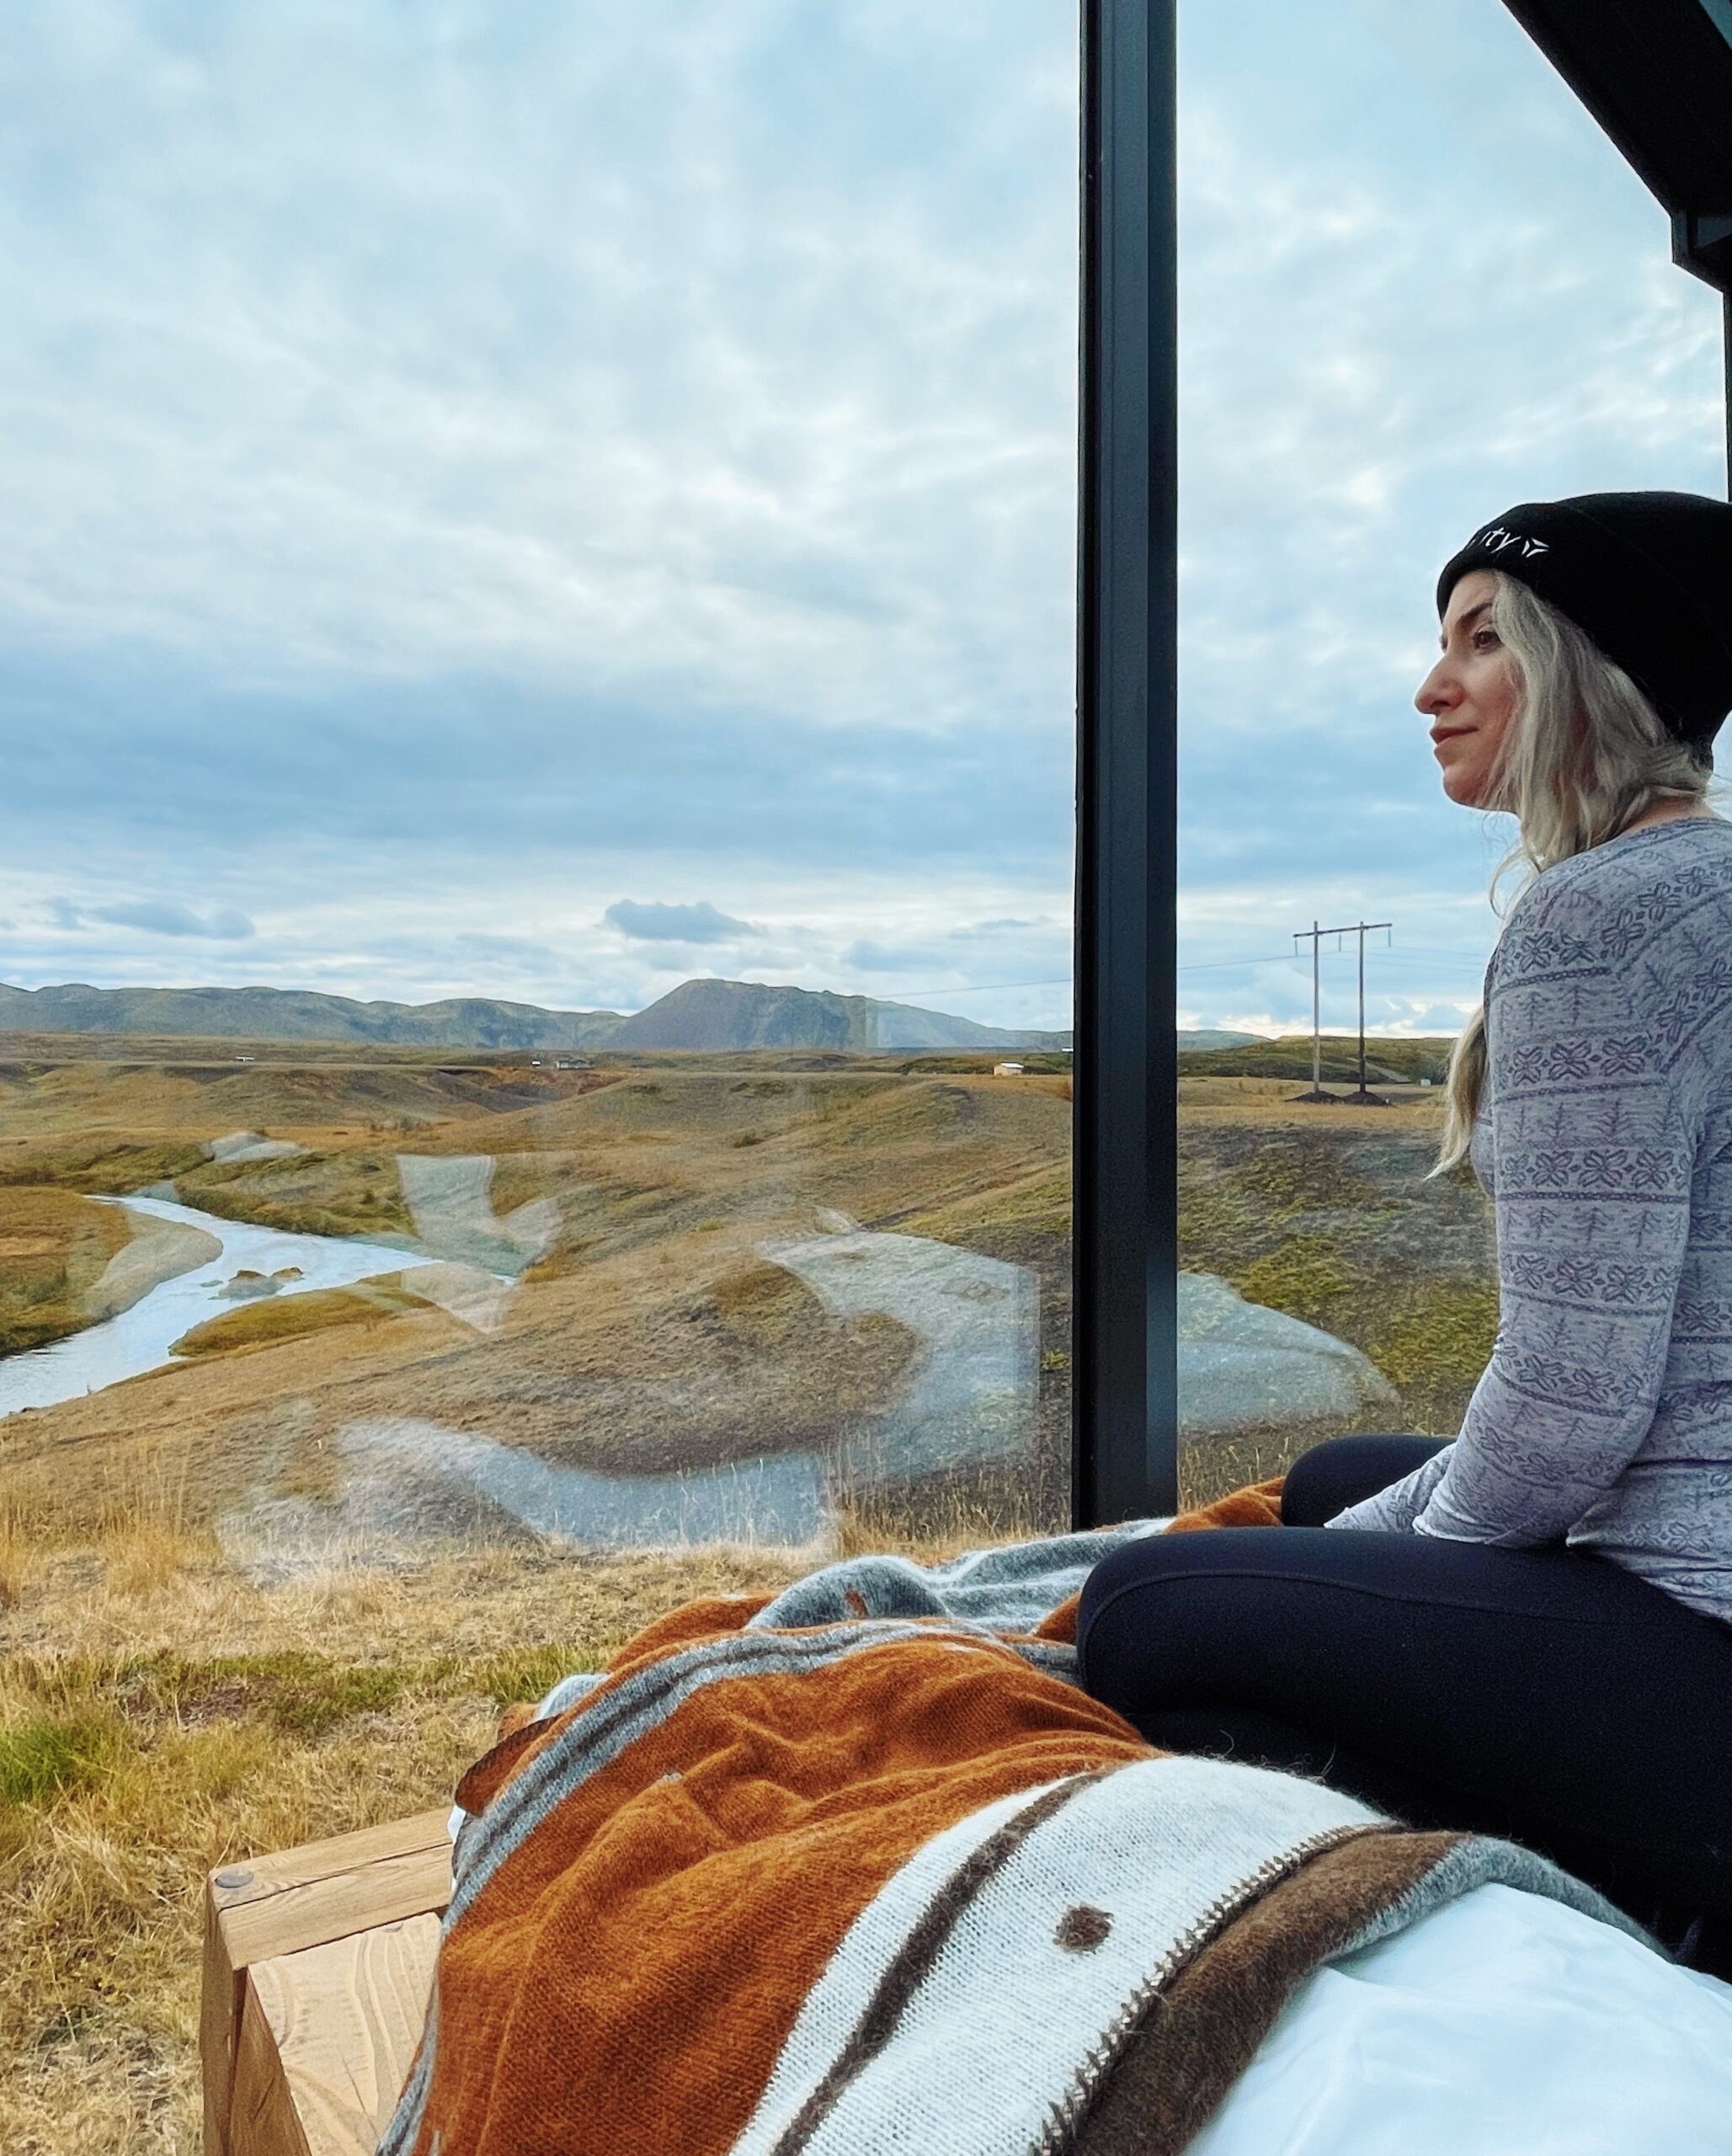 Sitting inside the glass roof cabin on the bed looking out at the Iceland landscape.